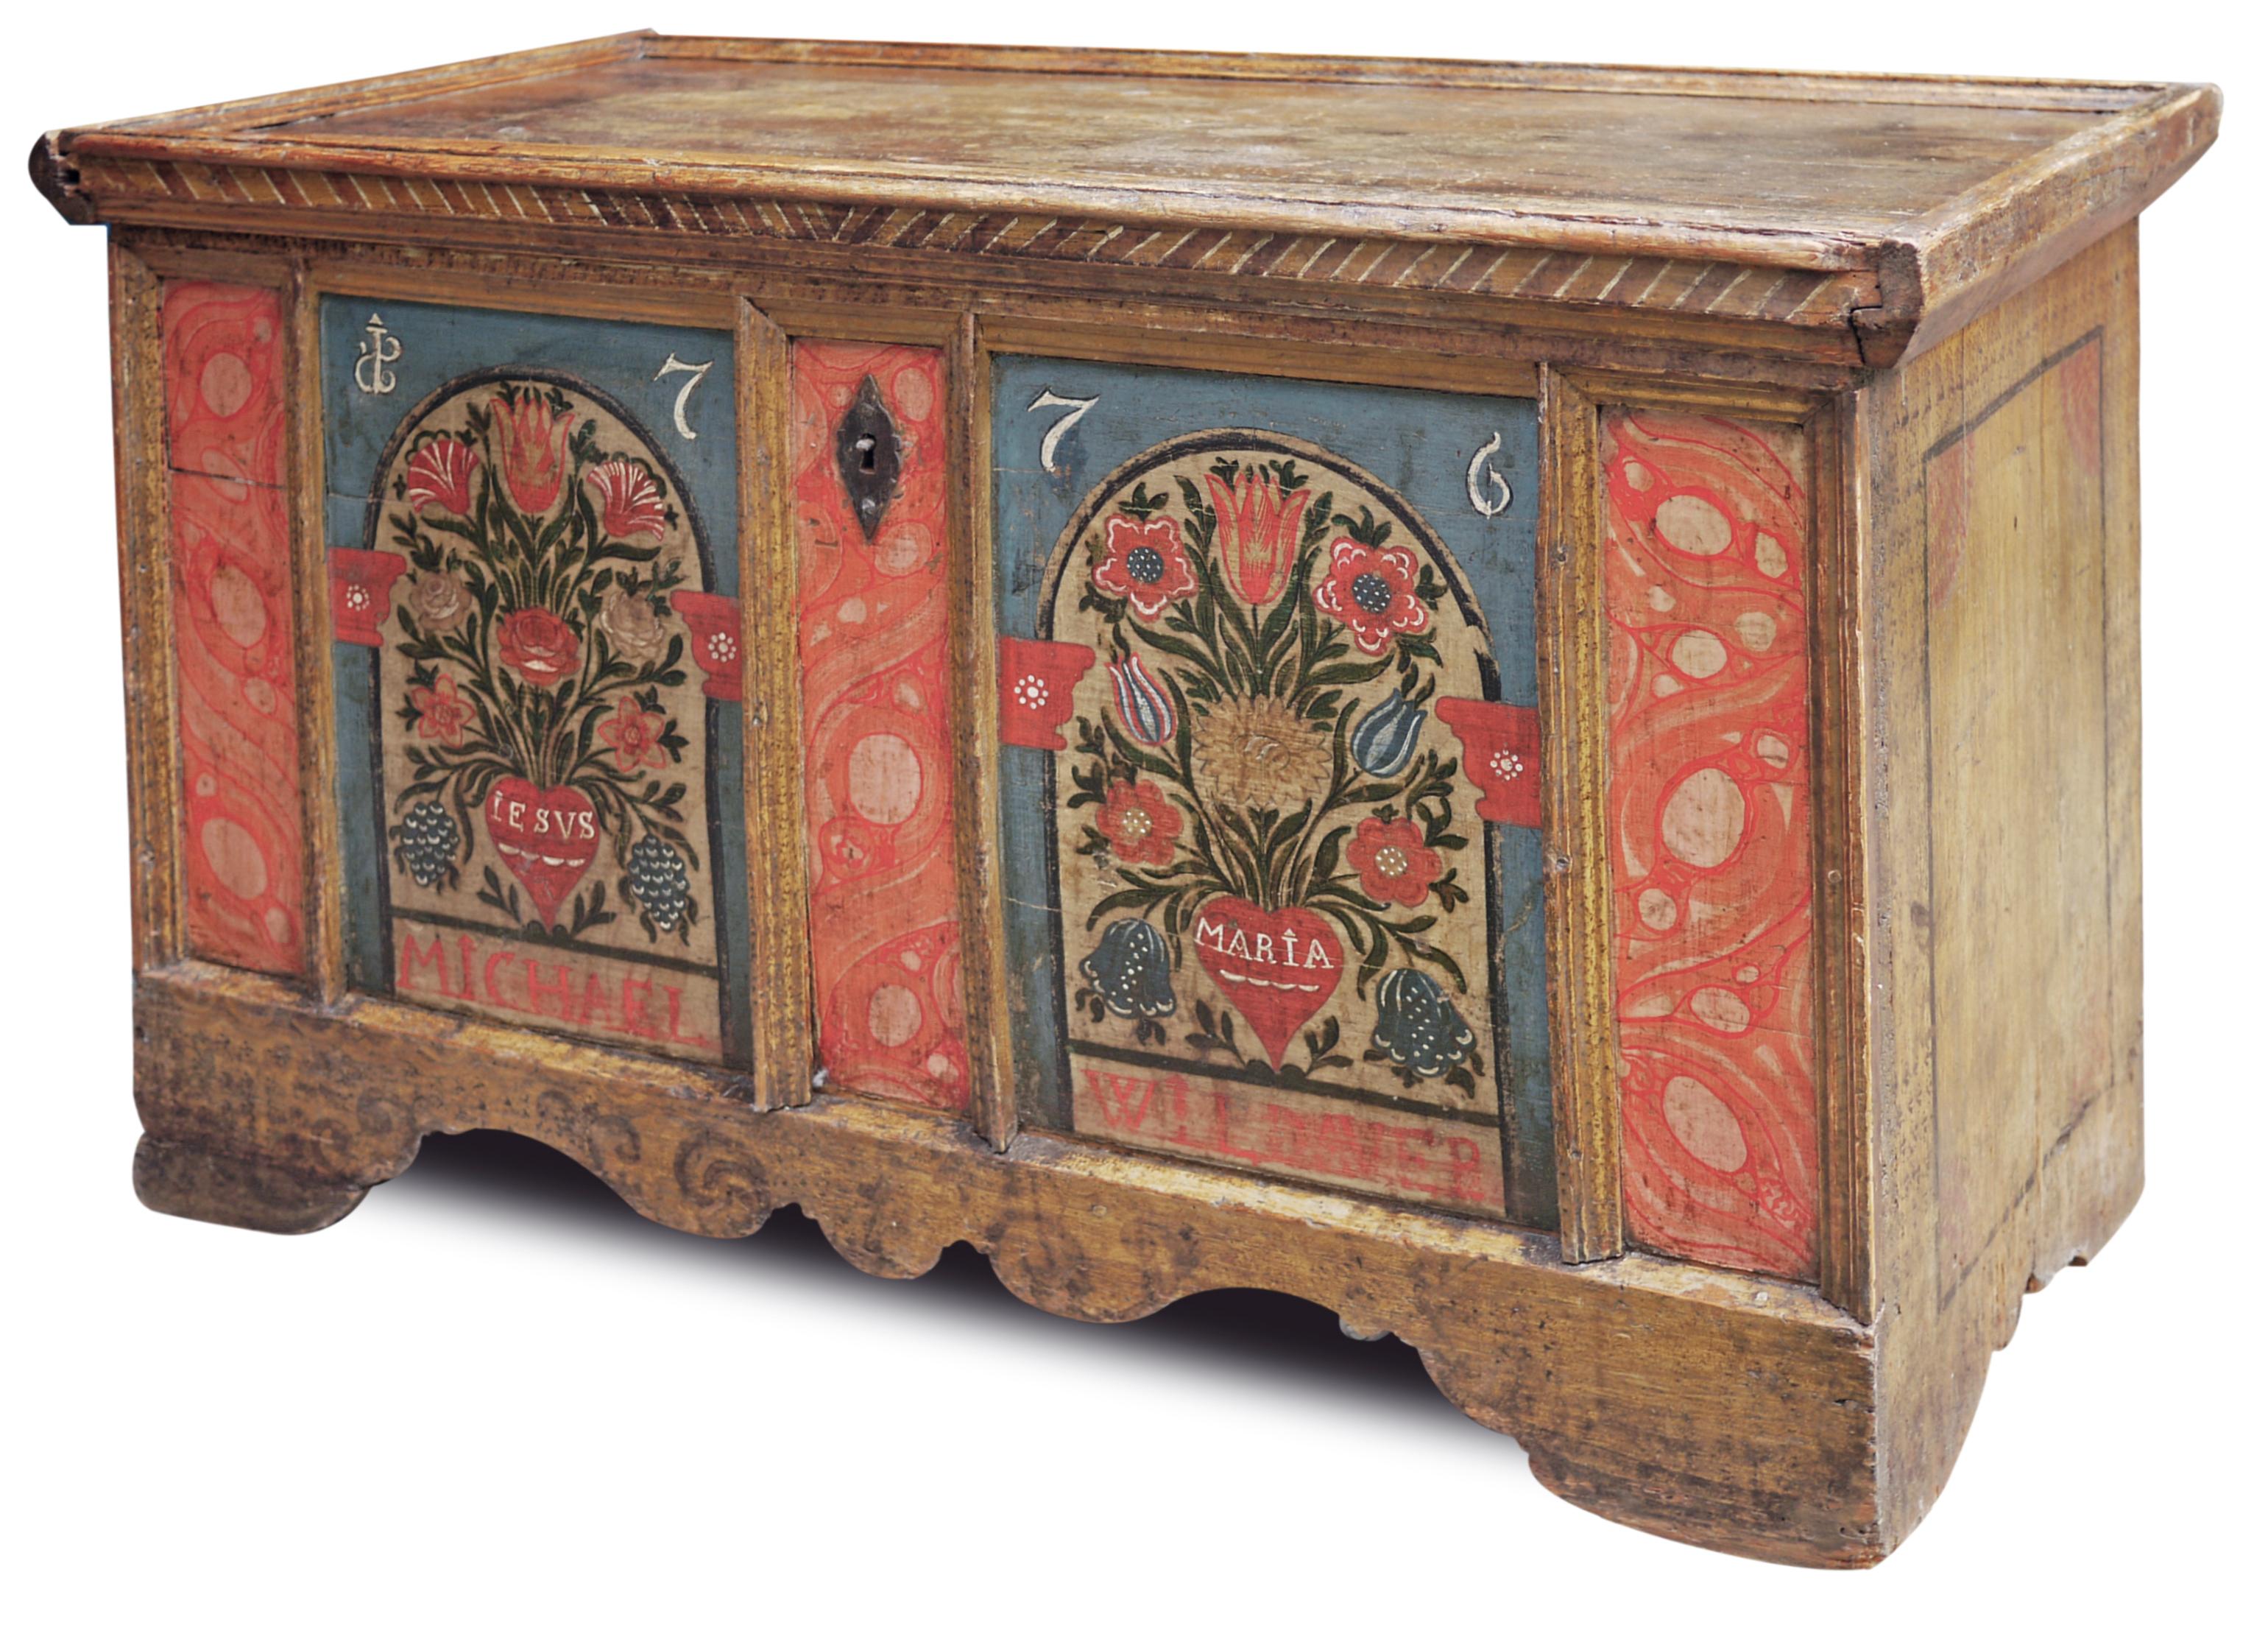 Blue and red dolomites chest with cups of flowers

Measures: H. 75cm, W. 120cm, D. 61cm

Rare antique Tyrolean chest, entirely painted with blue and red bands.

The front has two blue backgrounds painted with vases of flowers, an extremely